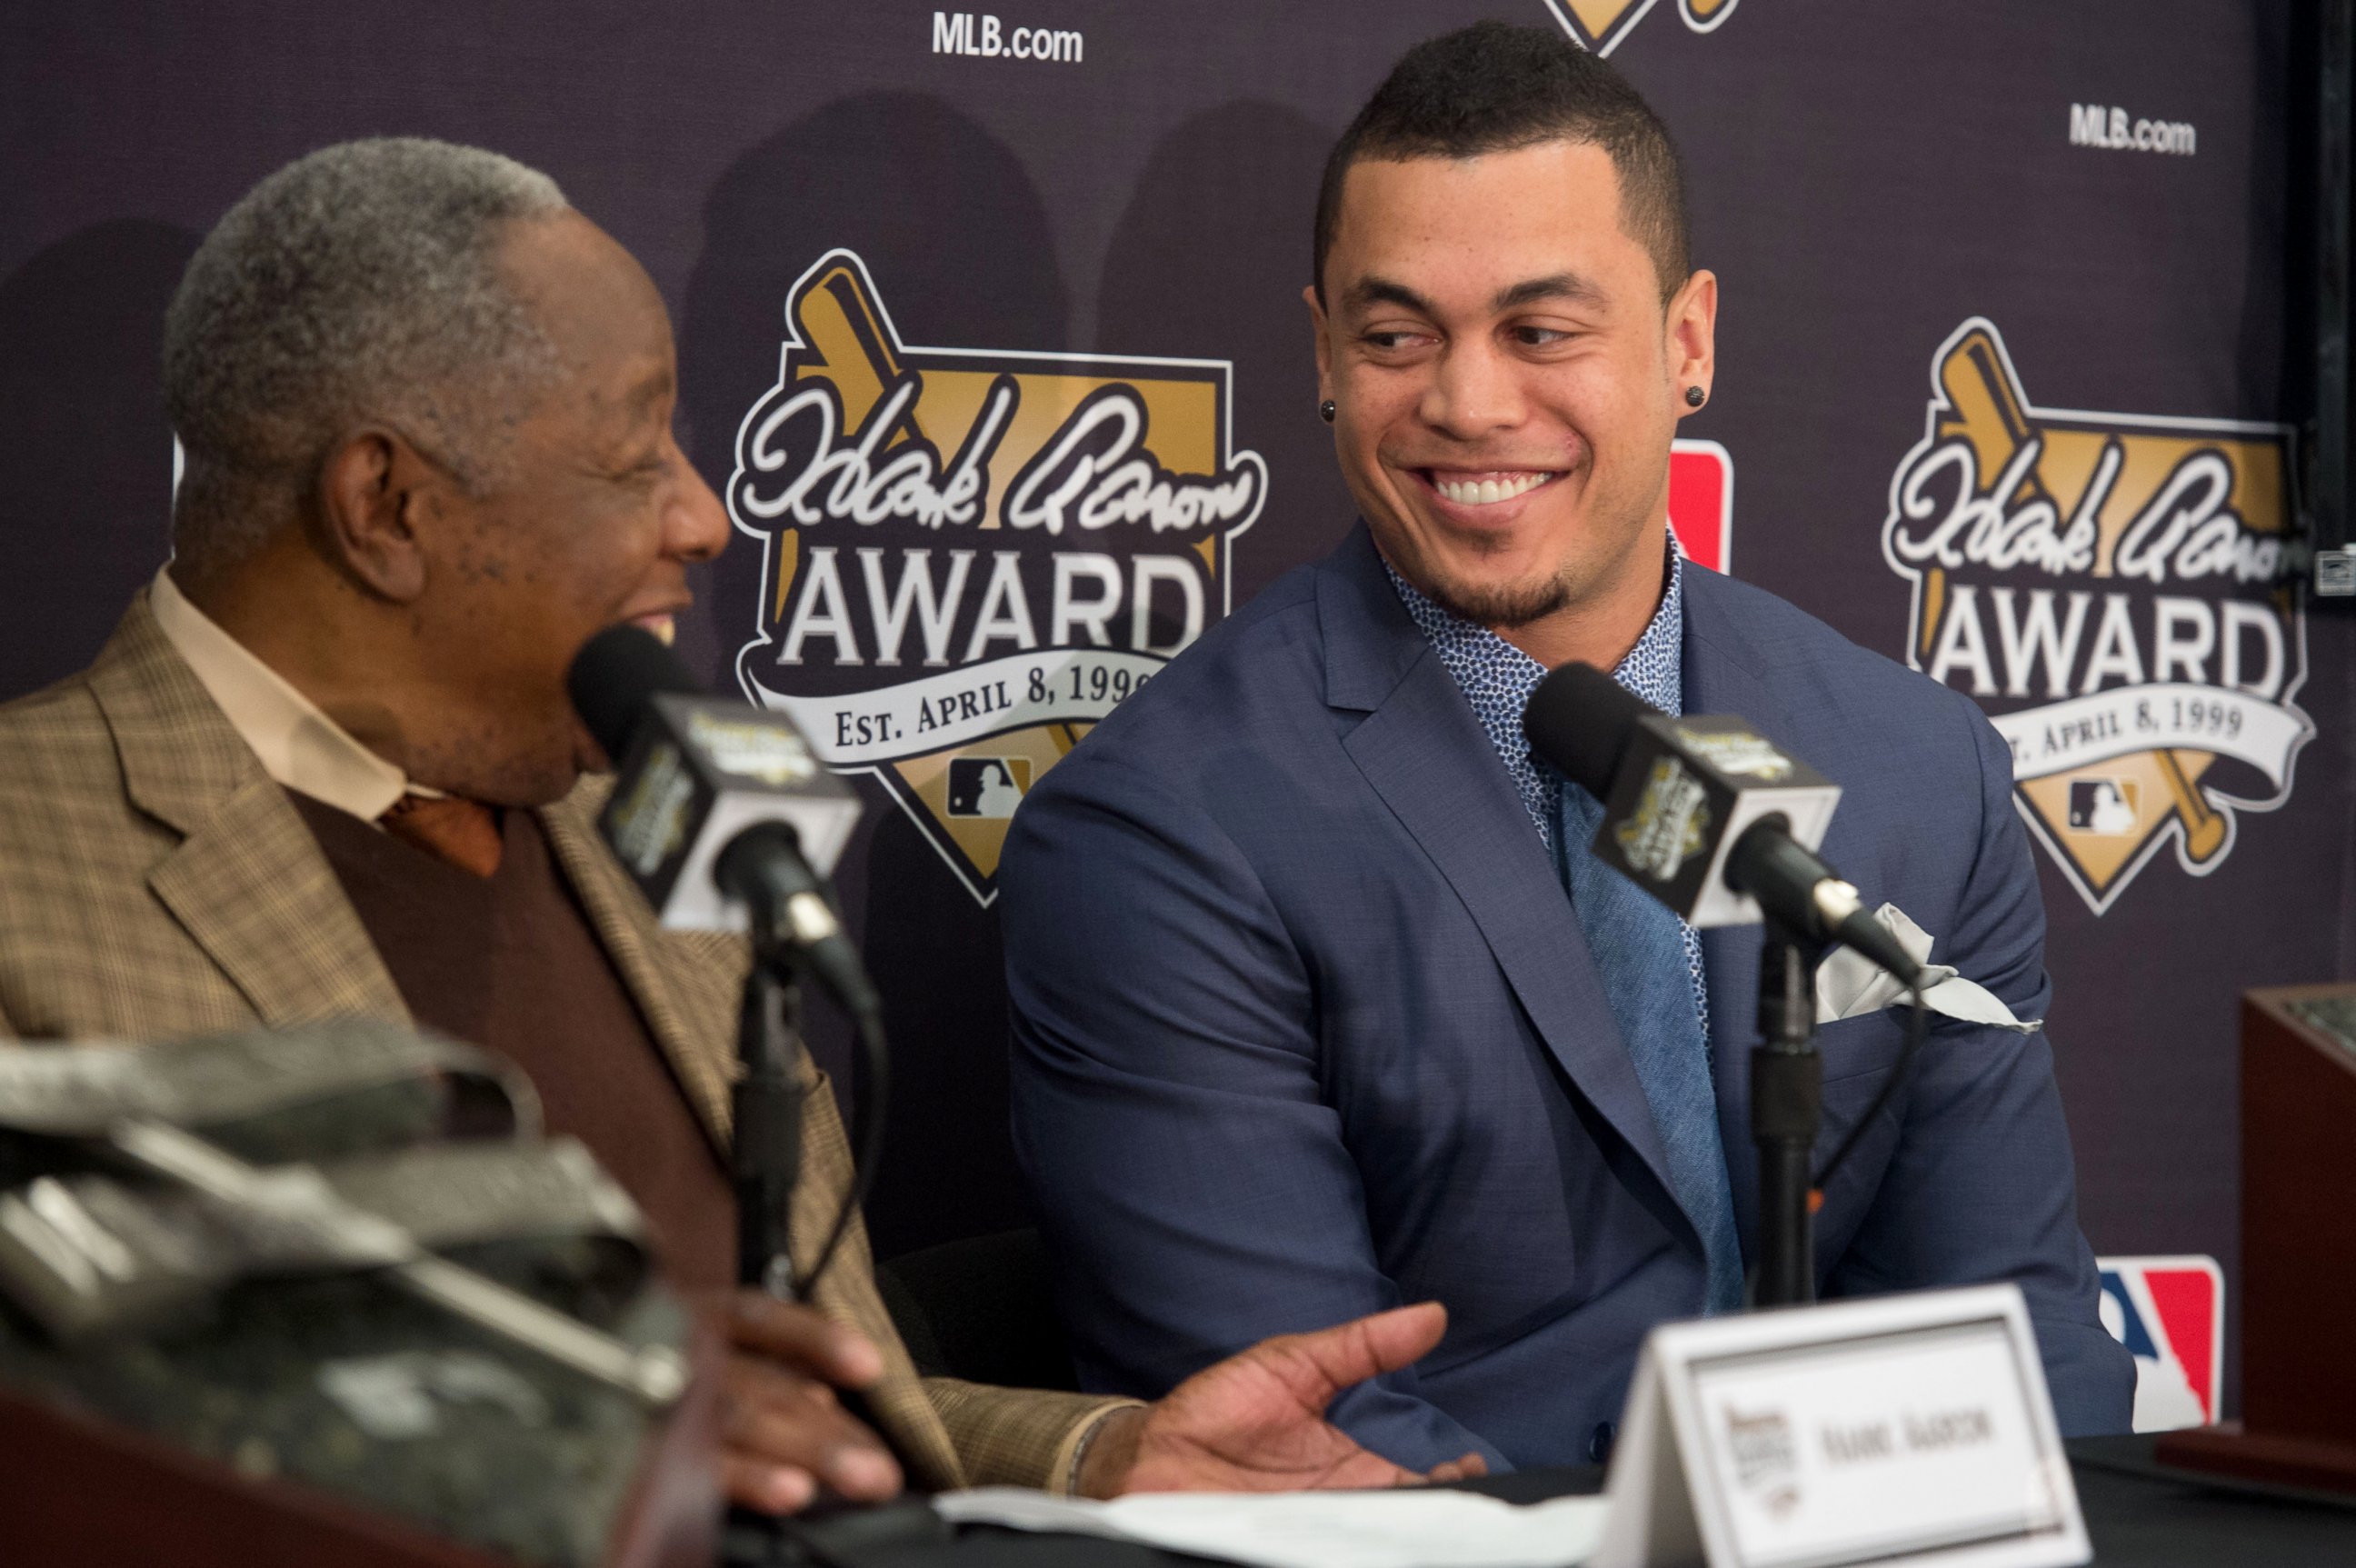 PHOTO: Hall of Famer Hank Aaron, left, and 2014 Hank Aaron Award recipient Giancarlo Stanton #27 of the Florida Marlins share a laugh during the Hank Aaron Award press conference, Oct. 25, 2014, in San Francisco.